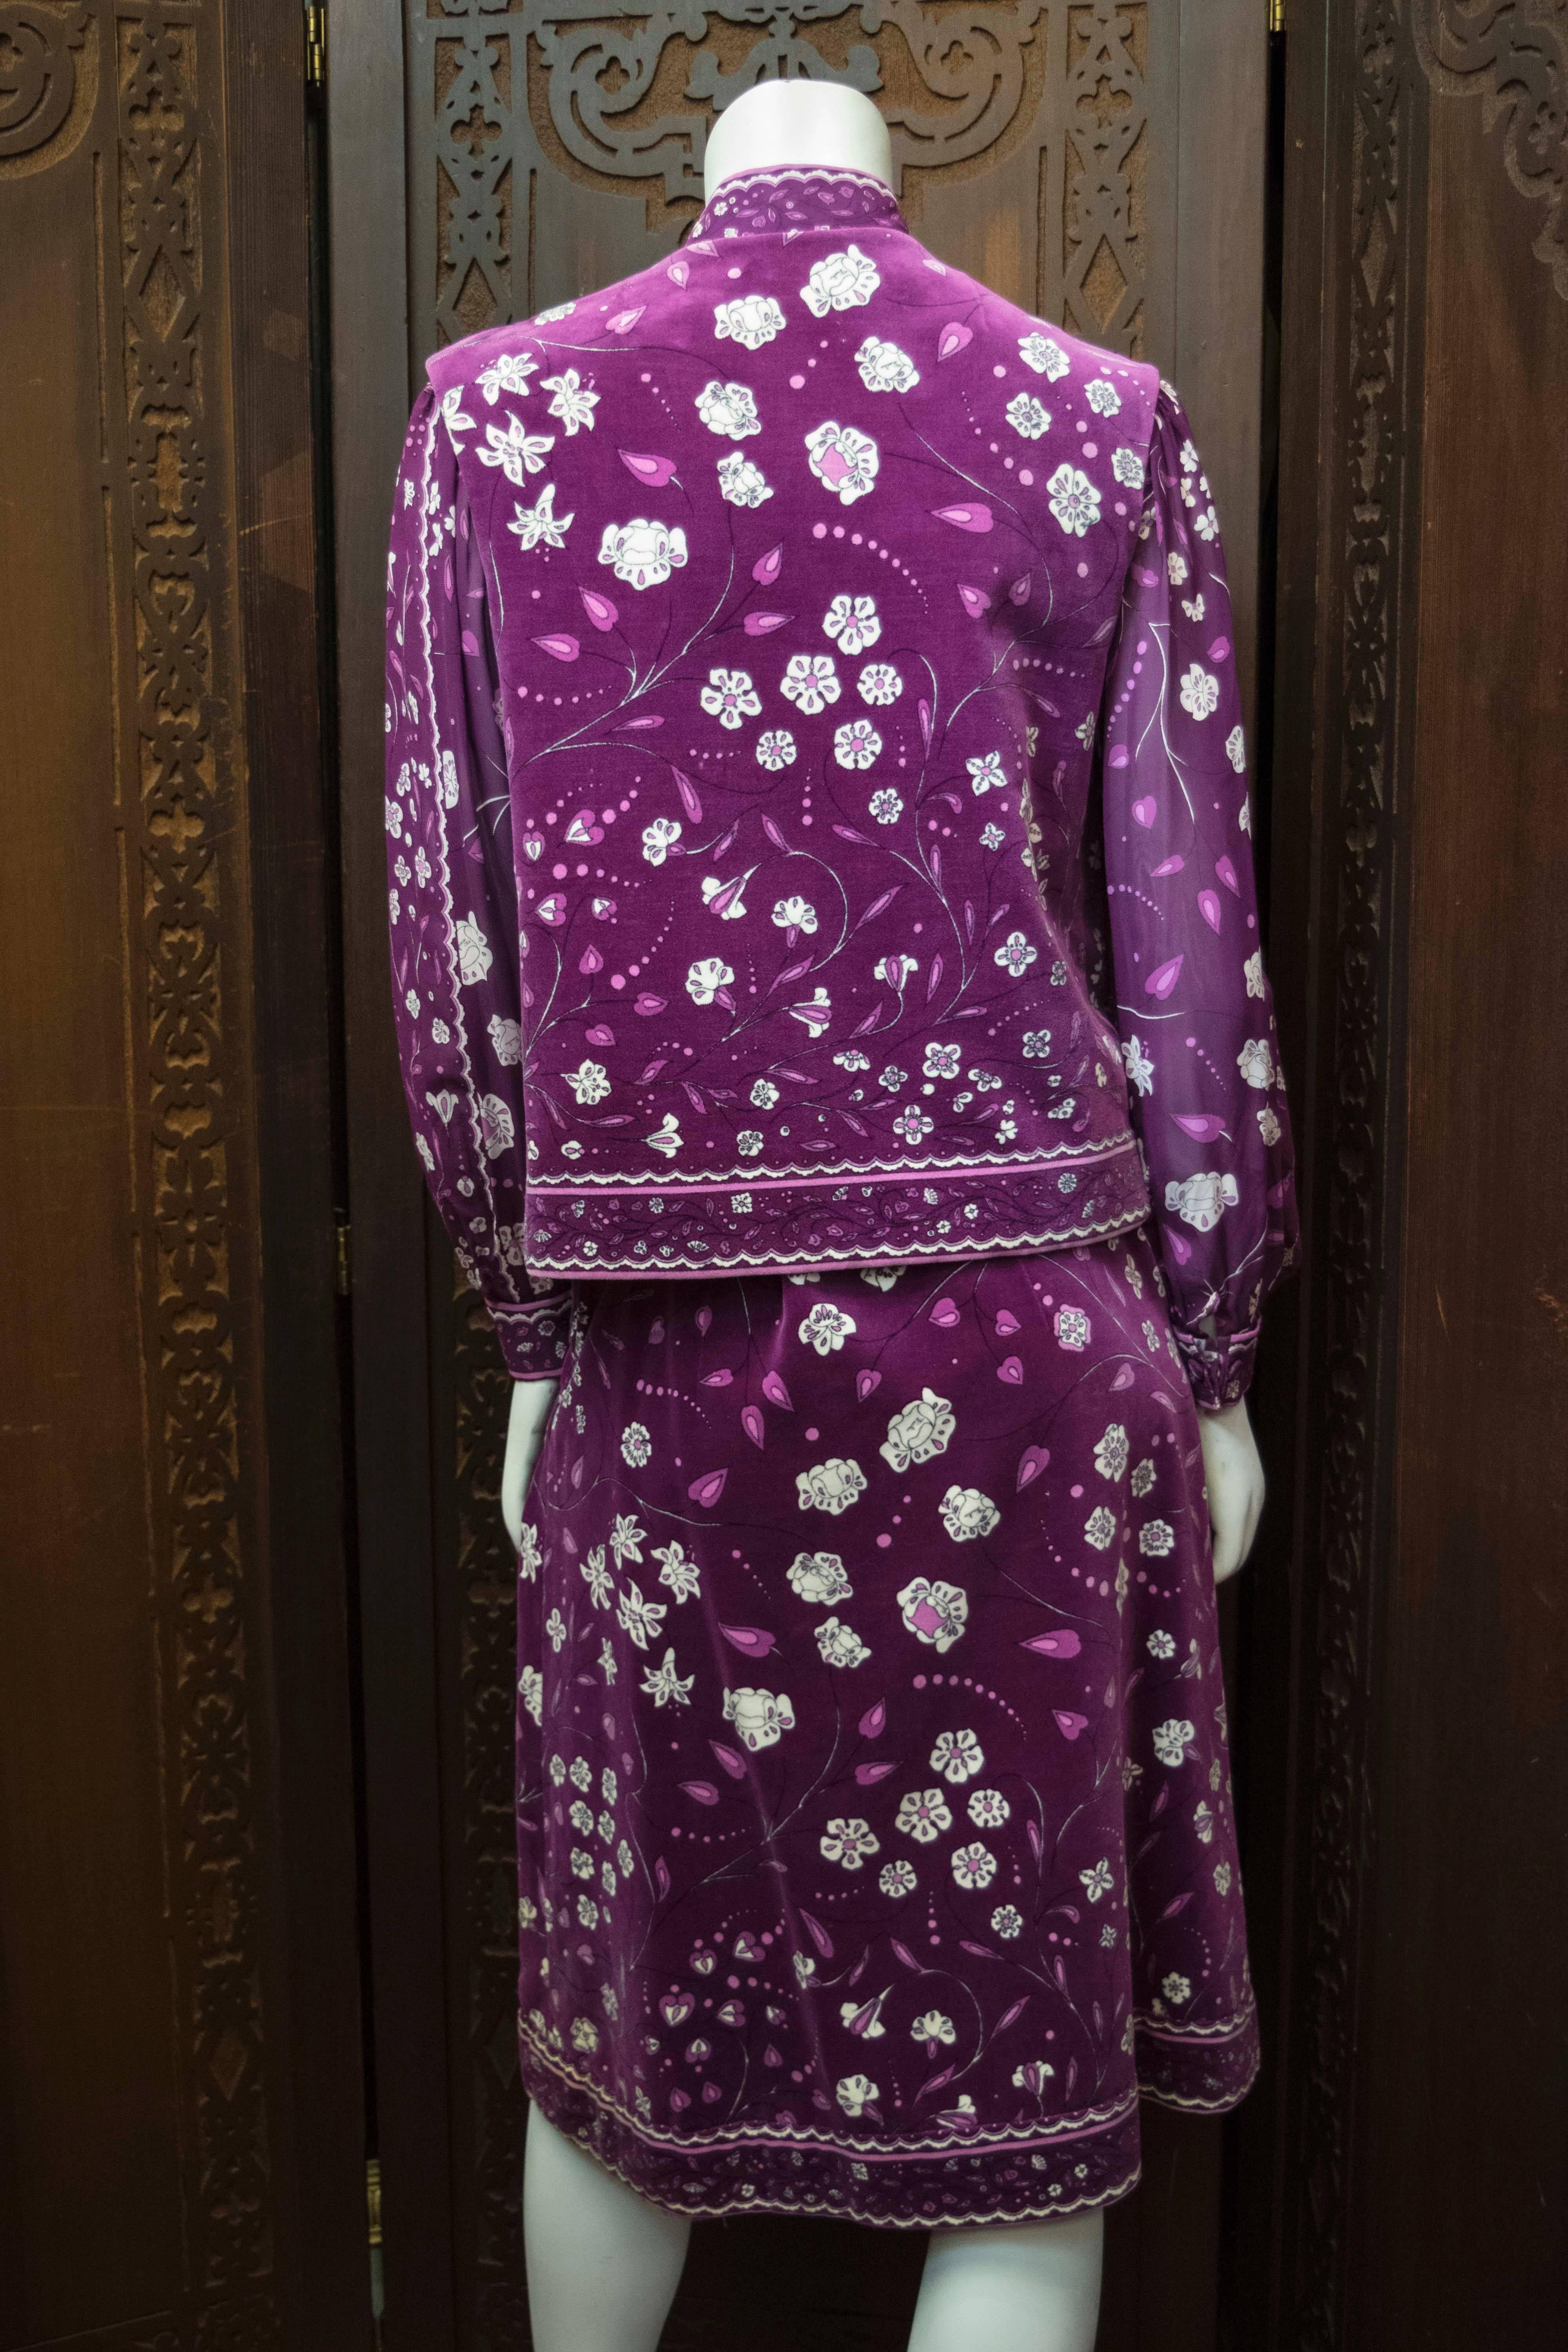 1970s Three Piece Purple Velvet Pucci Ensemble 

Stunning three piece ensemble designed by Pucci in the 1970s, retailed at Saks Fifth Avenue. This piece features a beautiful velvet skirt and waistcoat combination with sheer blouse. All three